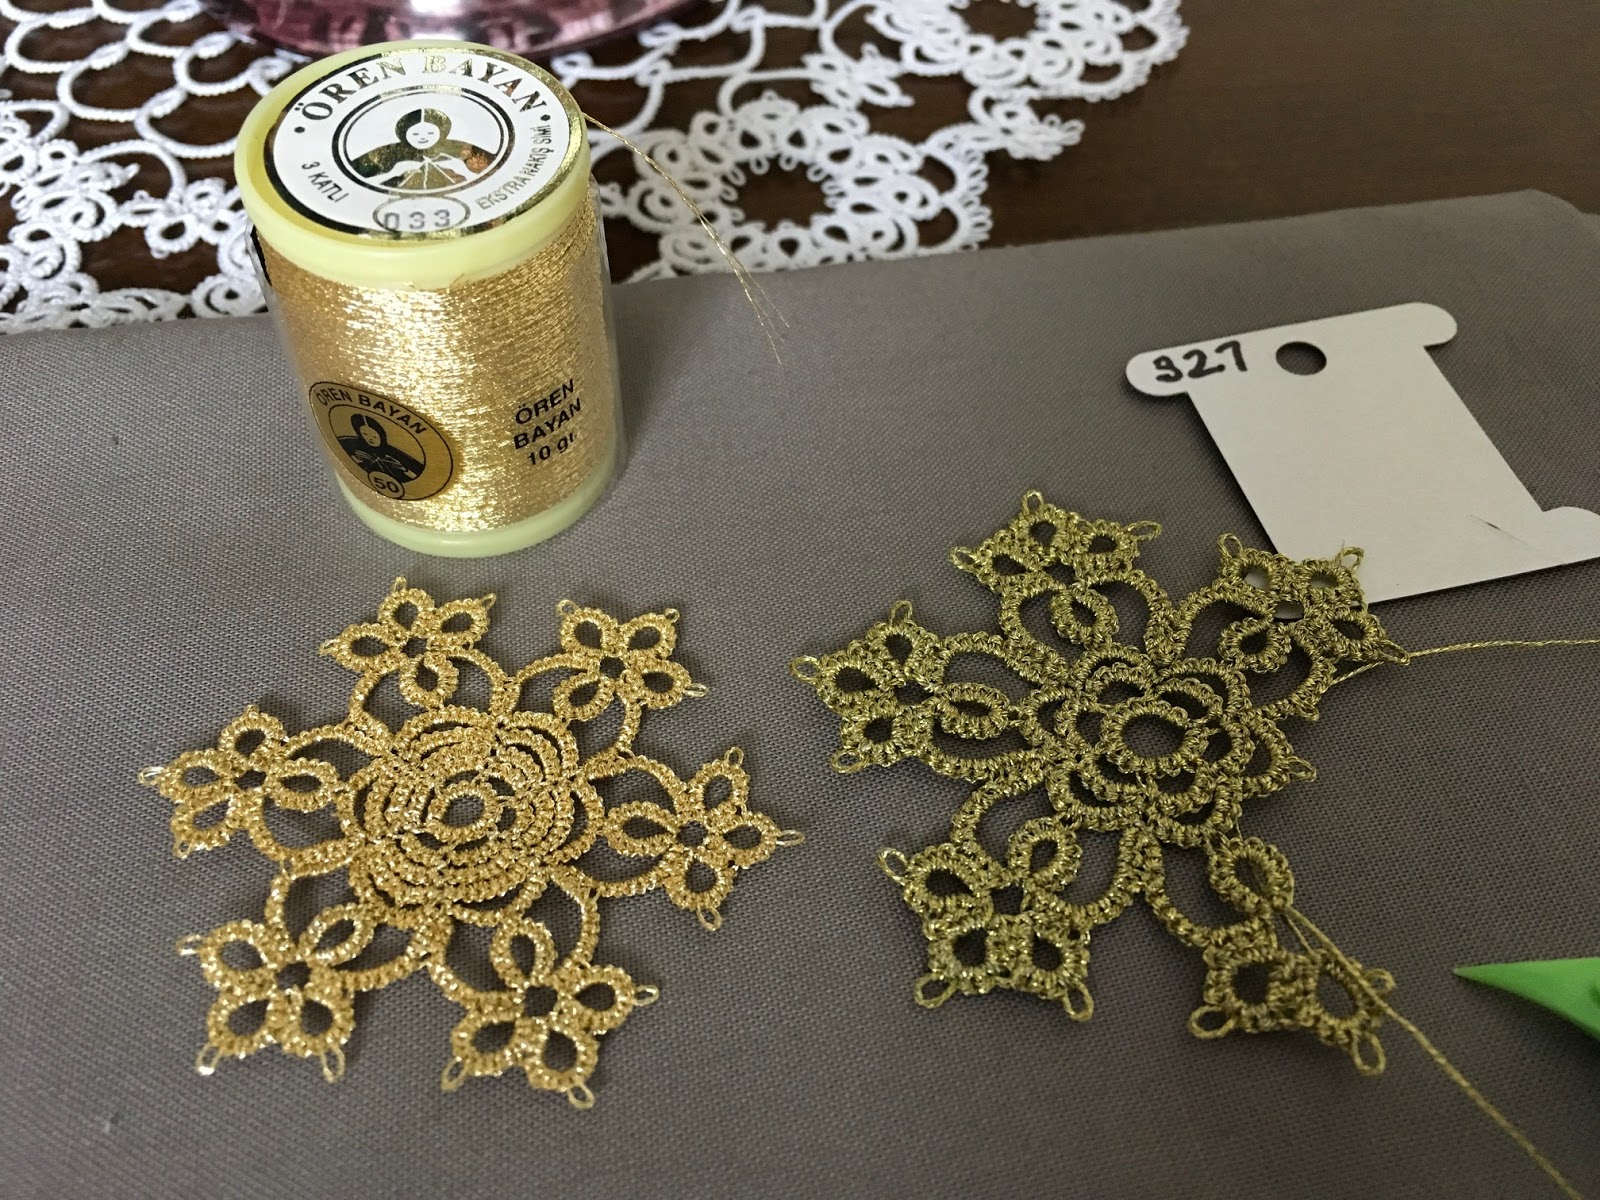 My 3rd attempt, I think I've got it now - rings are still a little uneven  but lizbeth tatting thread really makes a difference : r/tatting